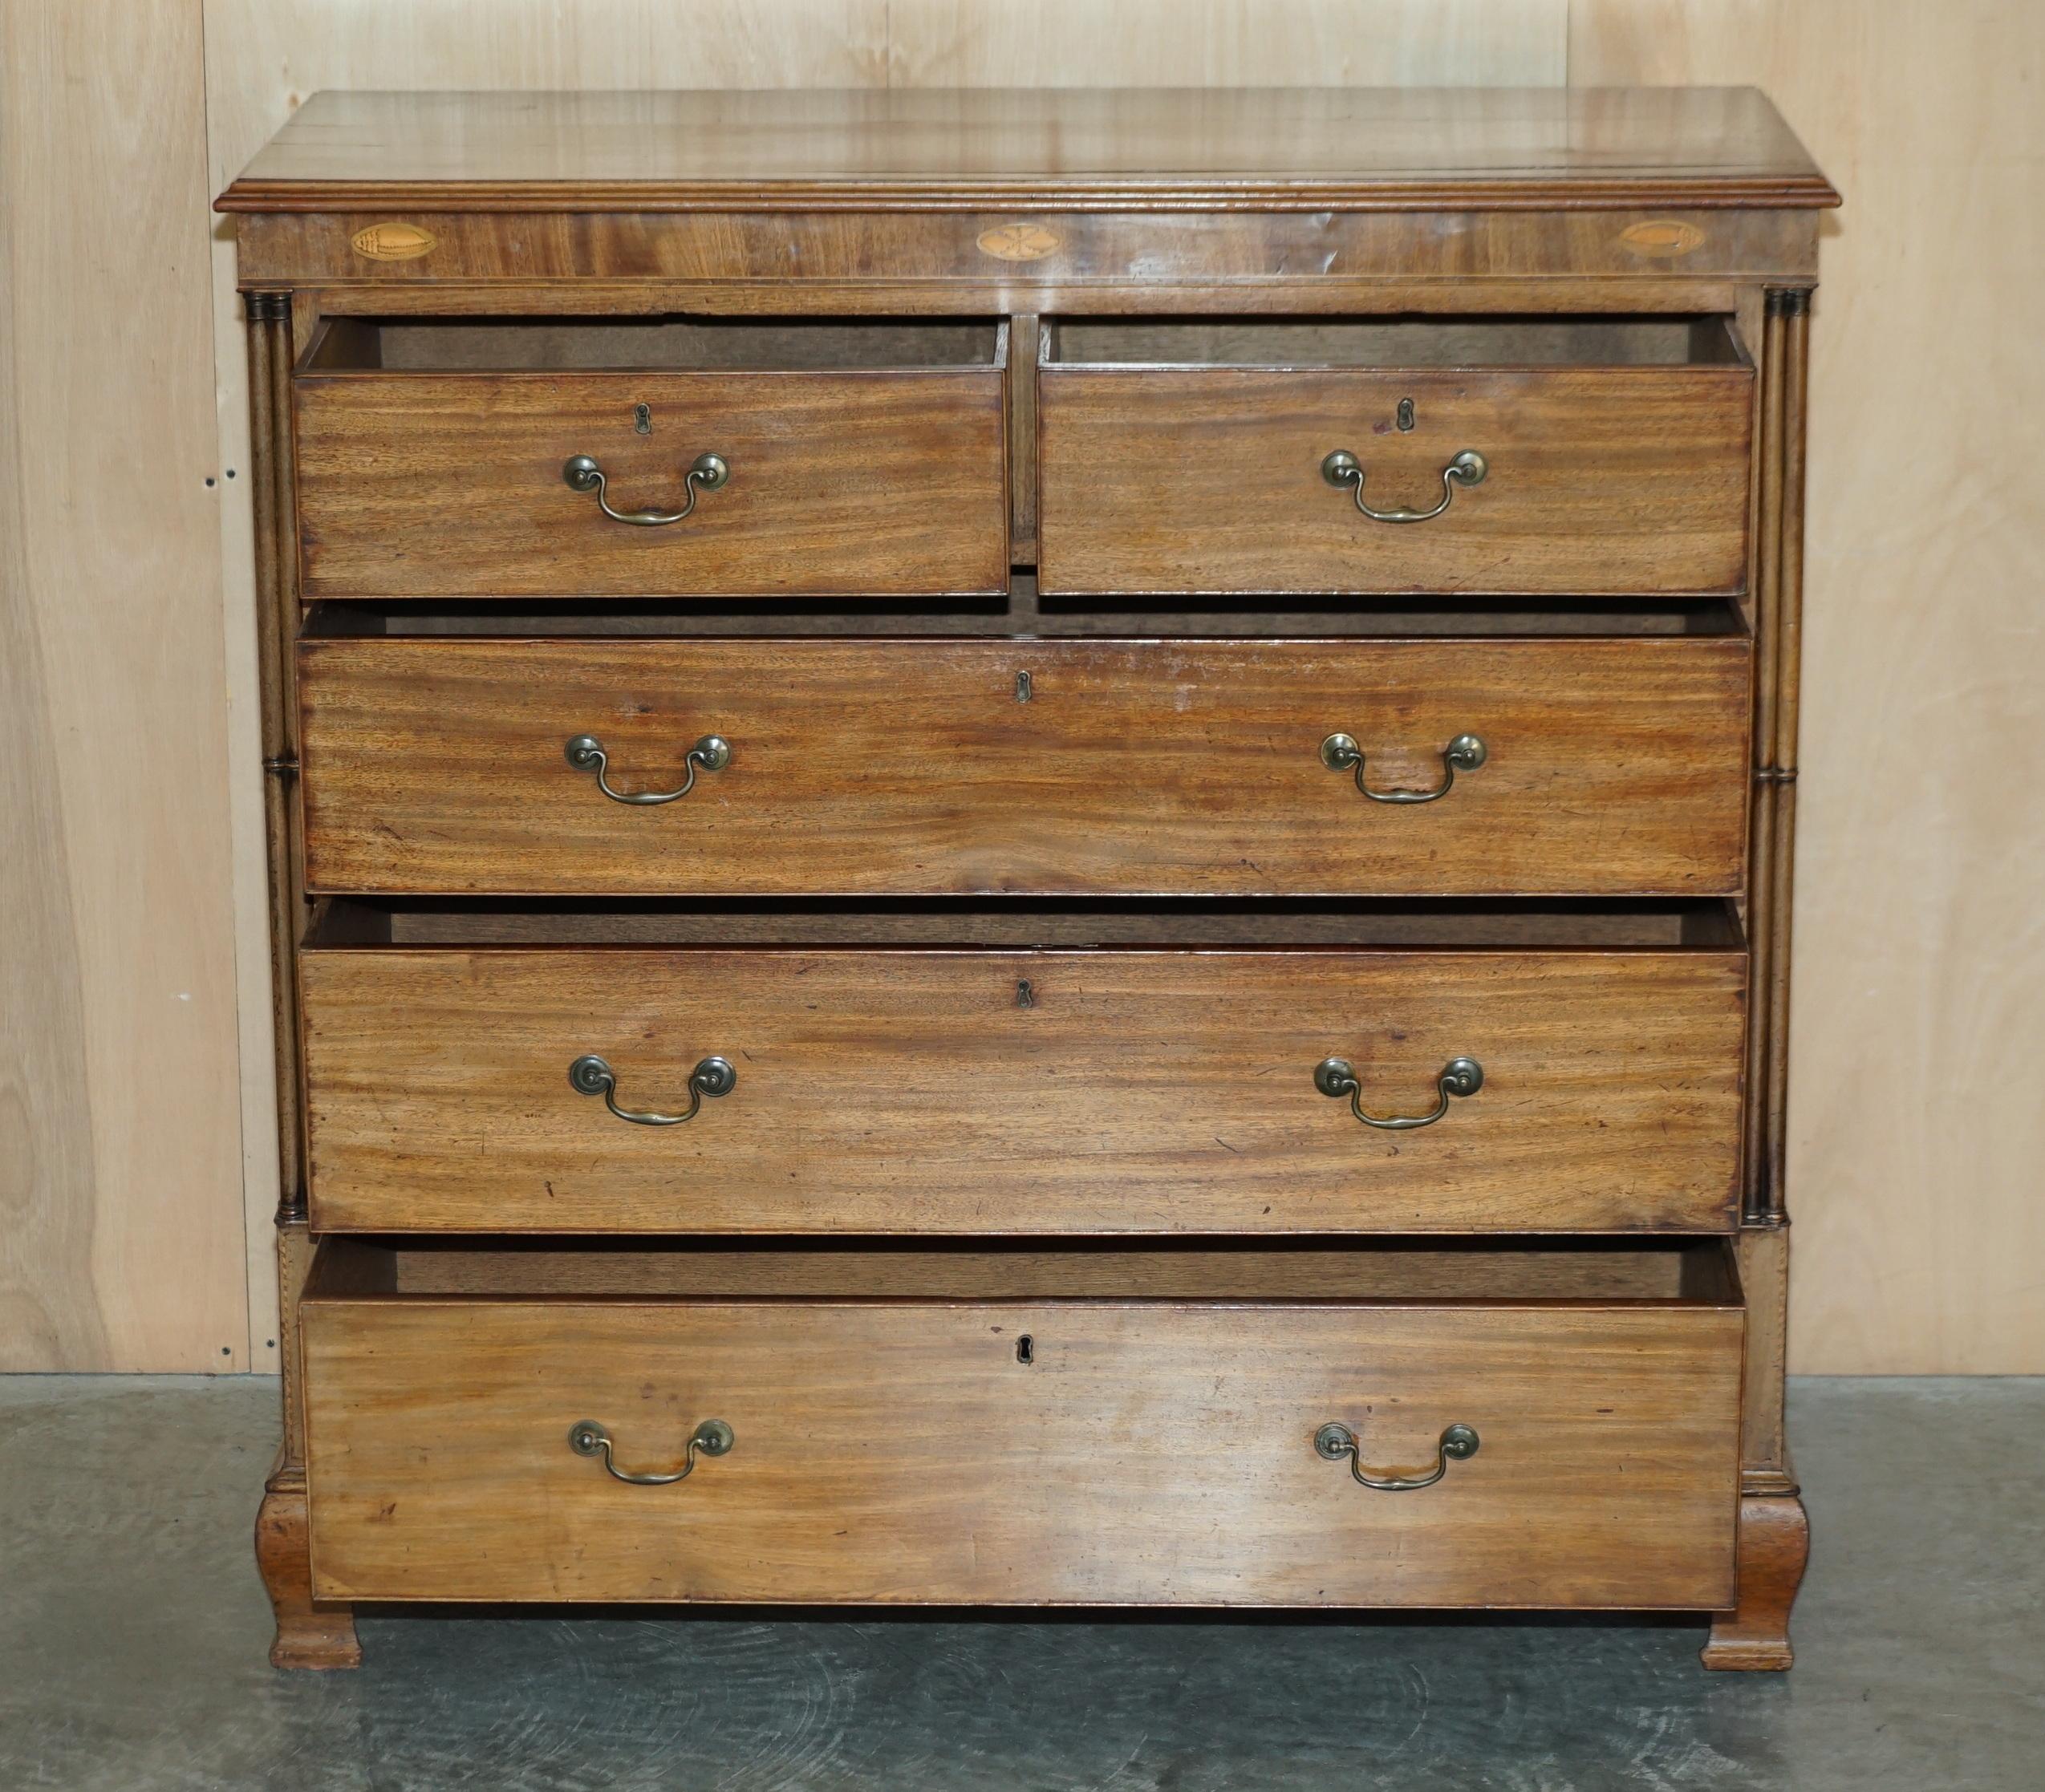 LARGE FiNE ANTIQUE THOMAS CHIPPENDALE SHERATON REVIVAL HARDWOOD CHEST OF DRAWERS For Sale 12